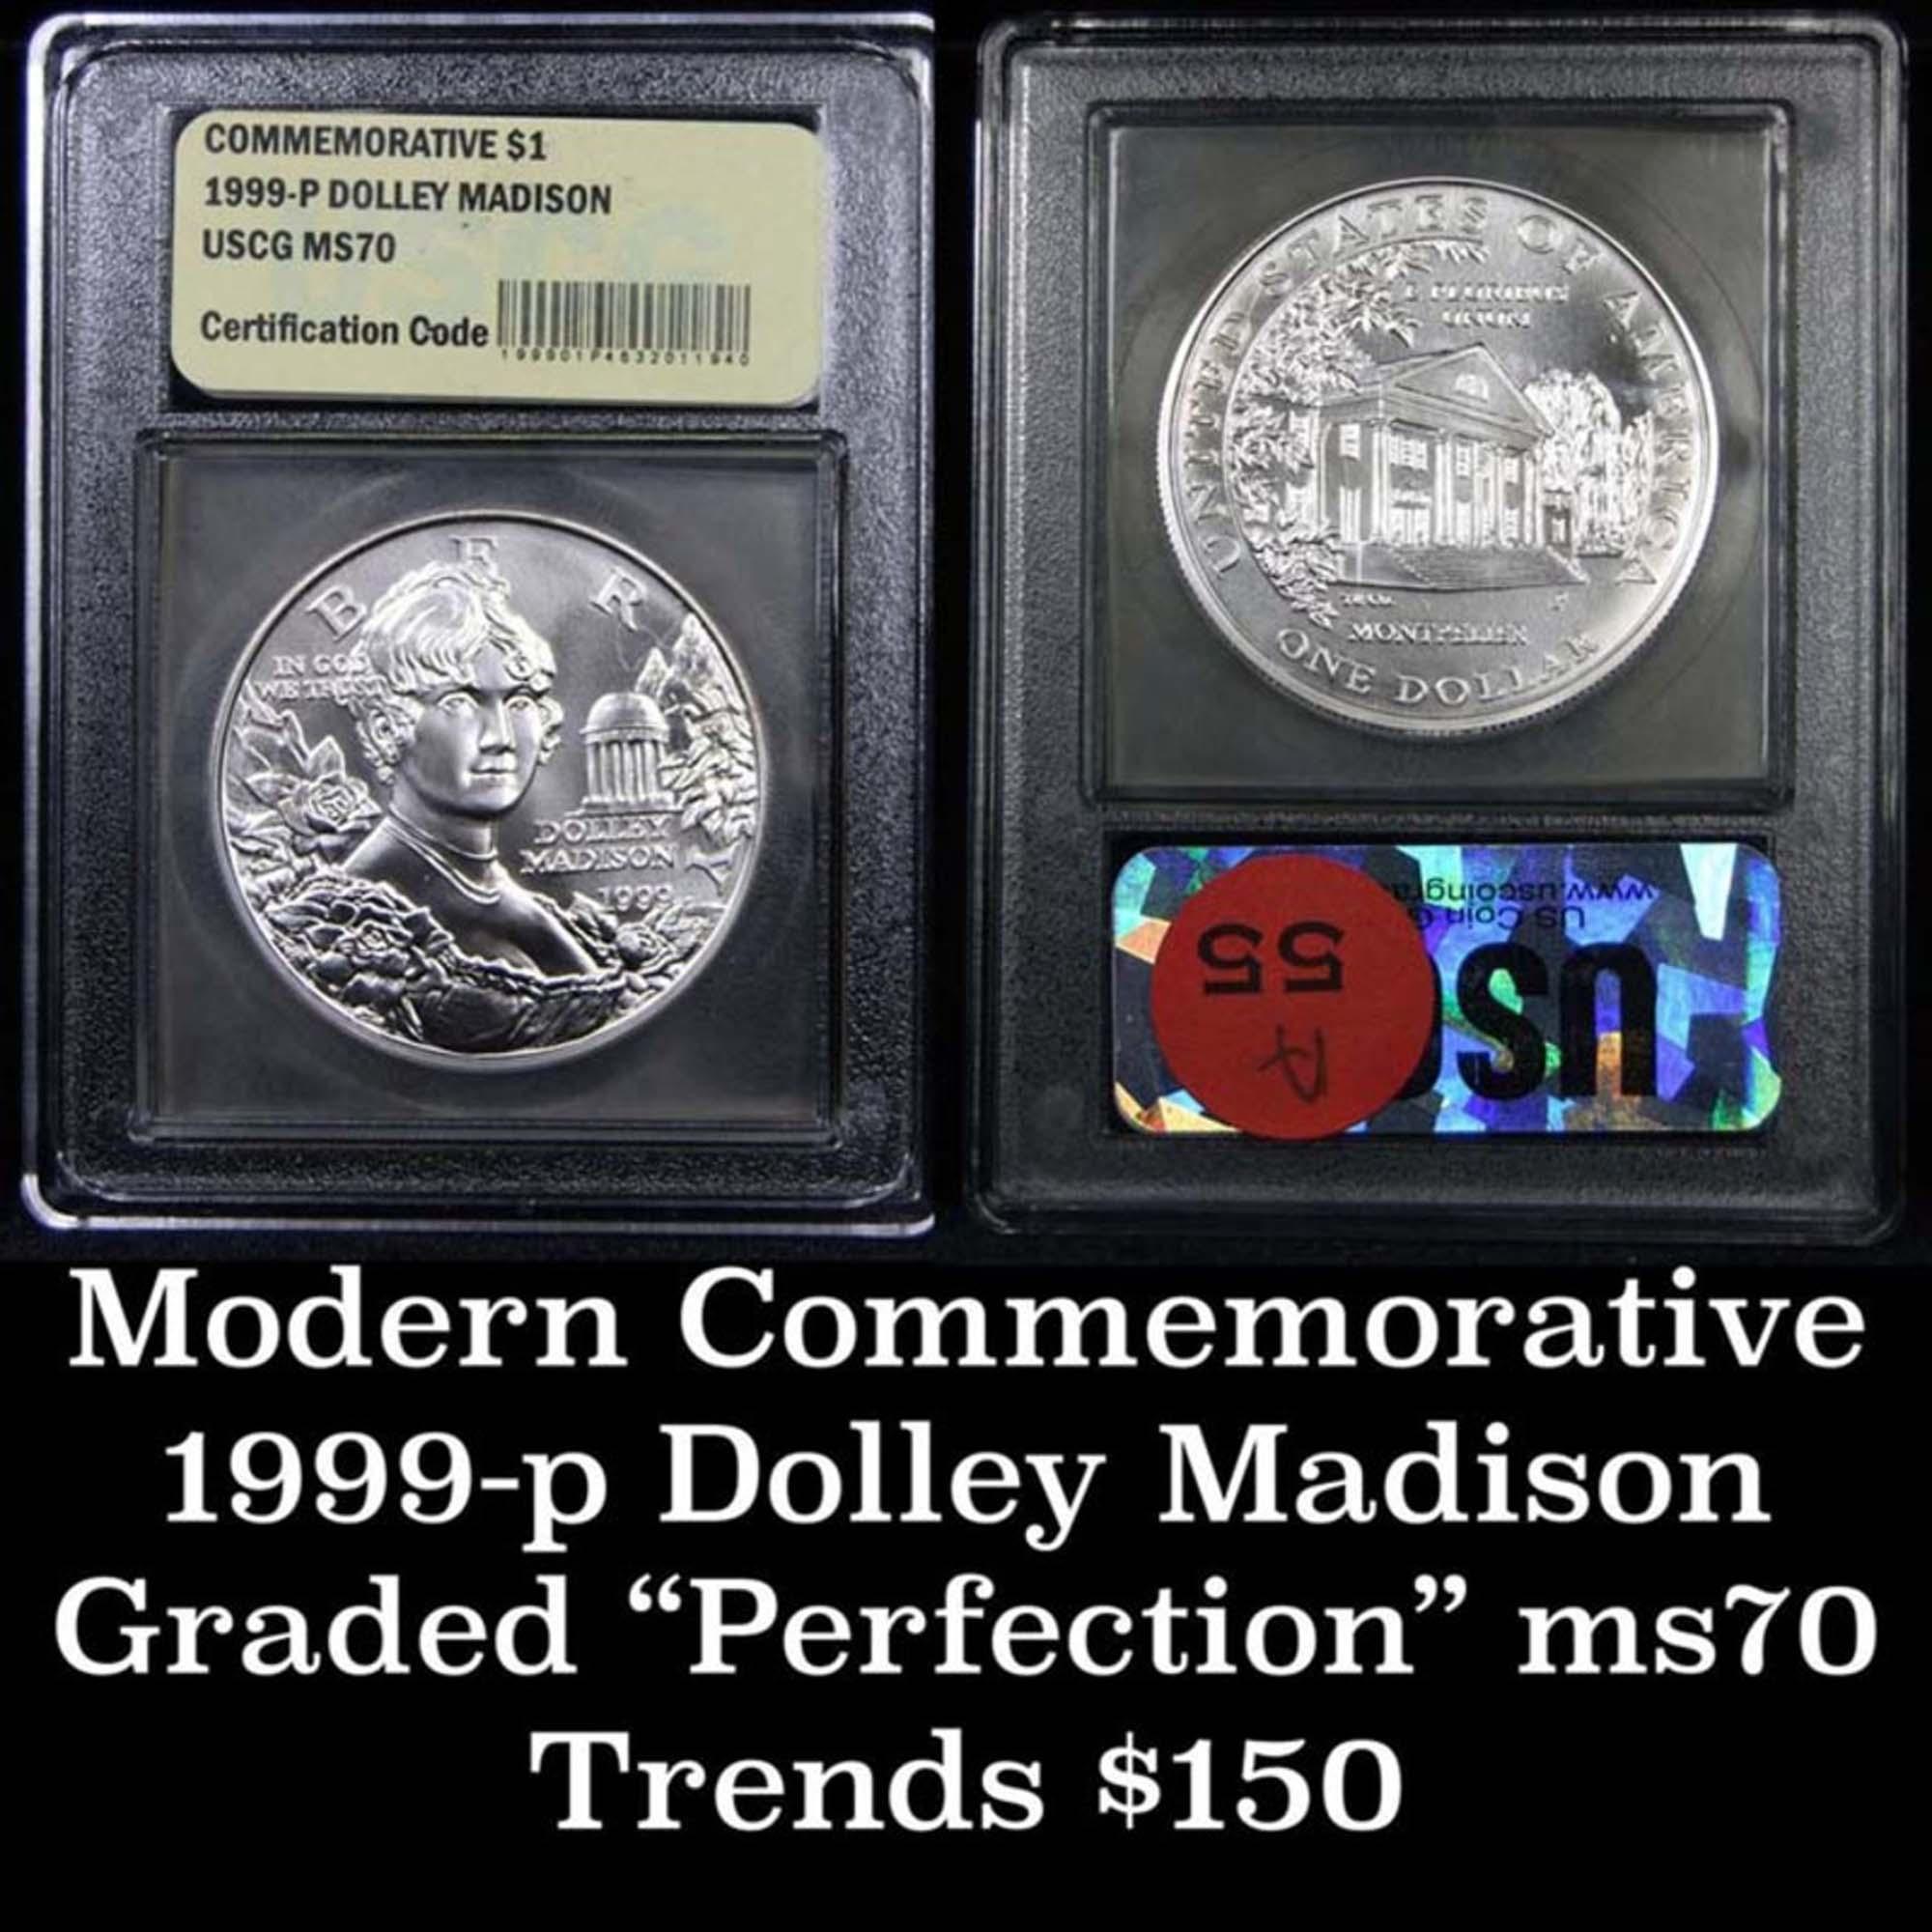 1999-p Dolley Madison Modern Commem Dollar 1 Graded ms70, Perfection by USCG